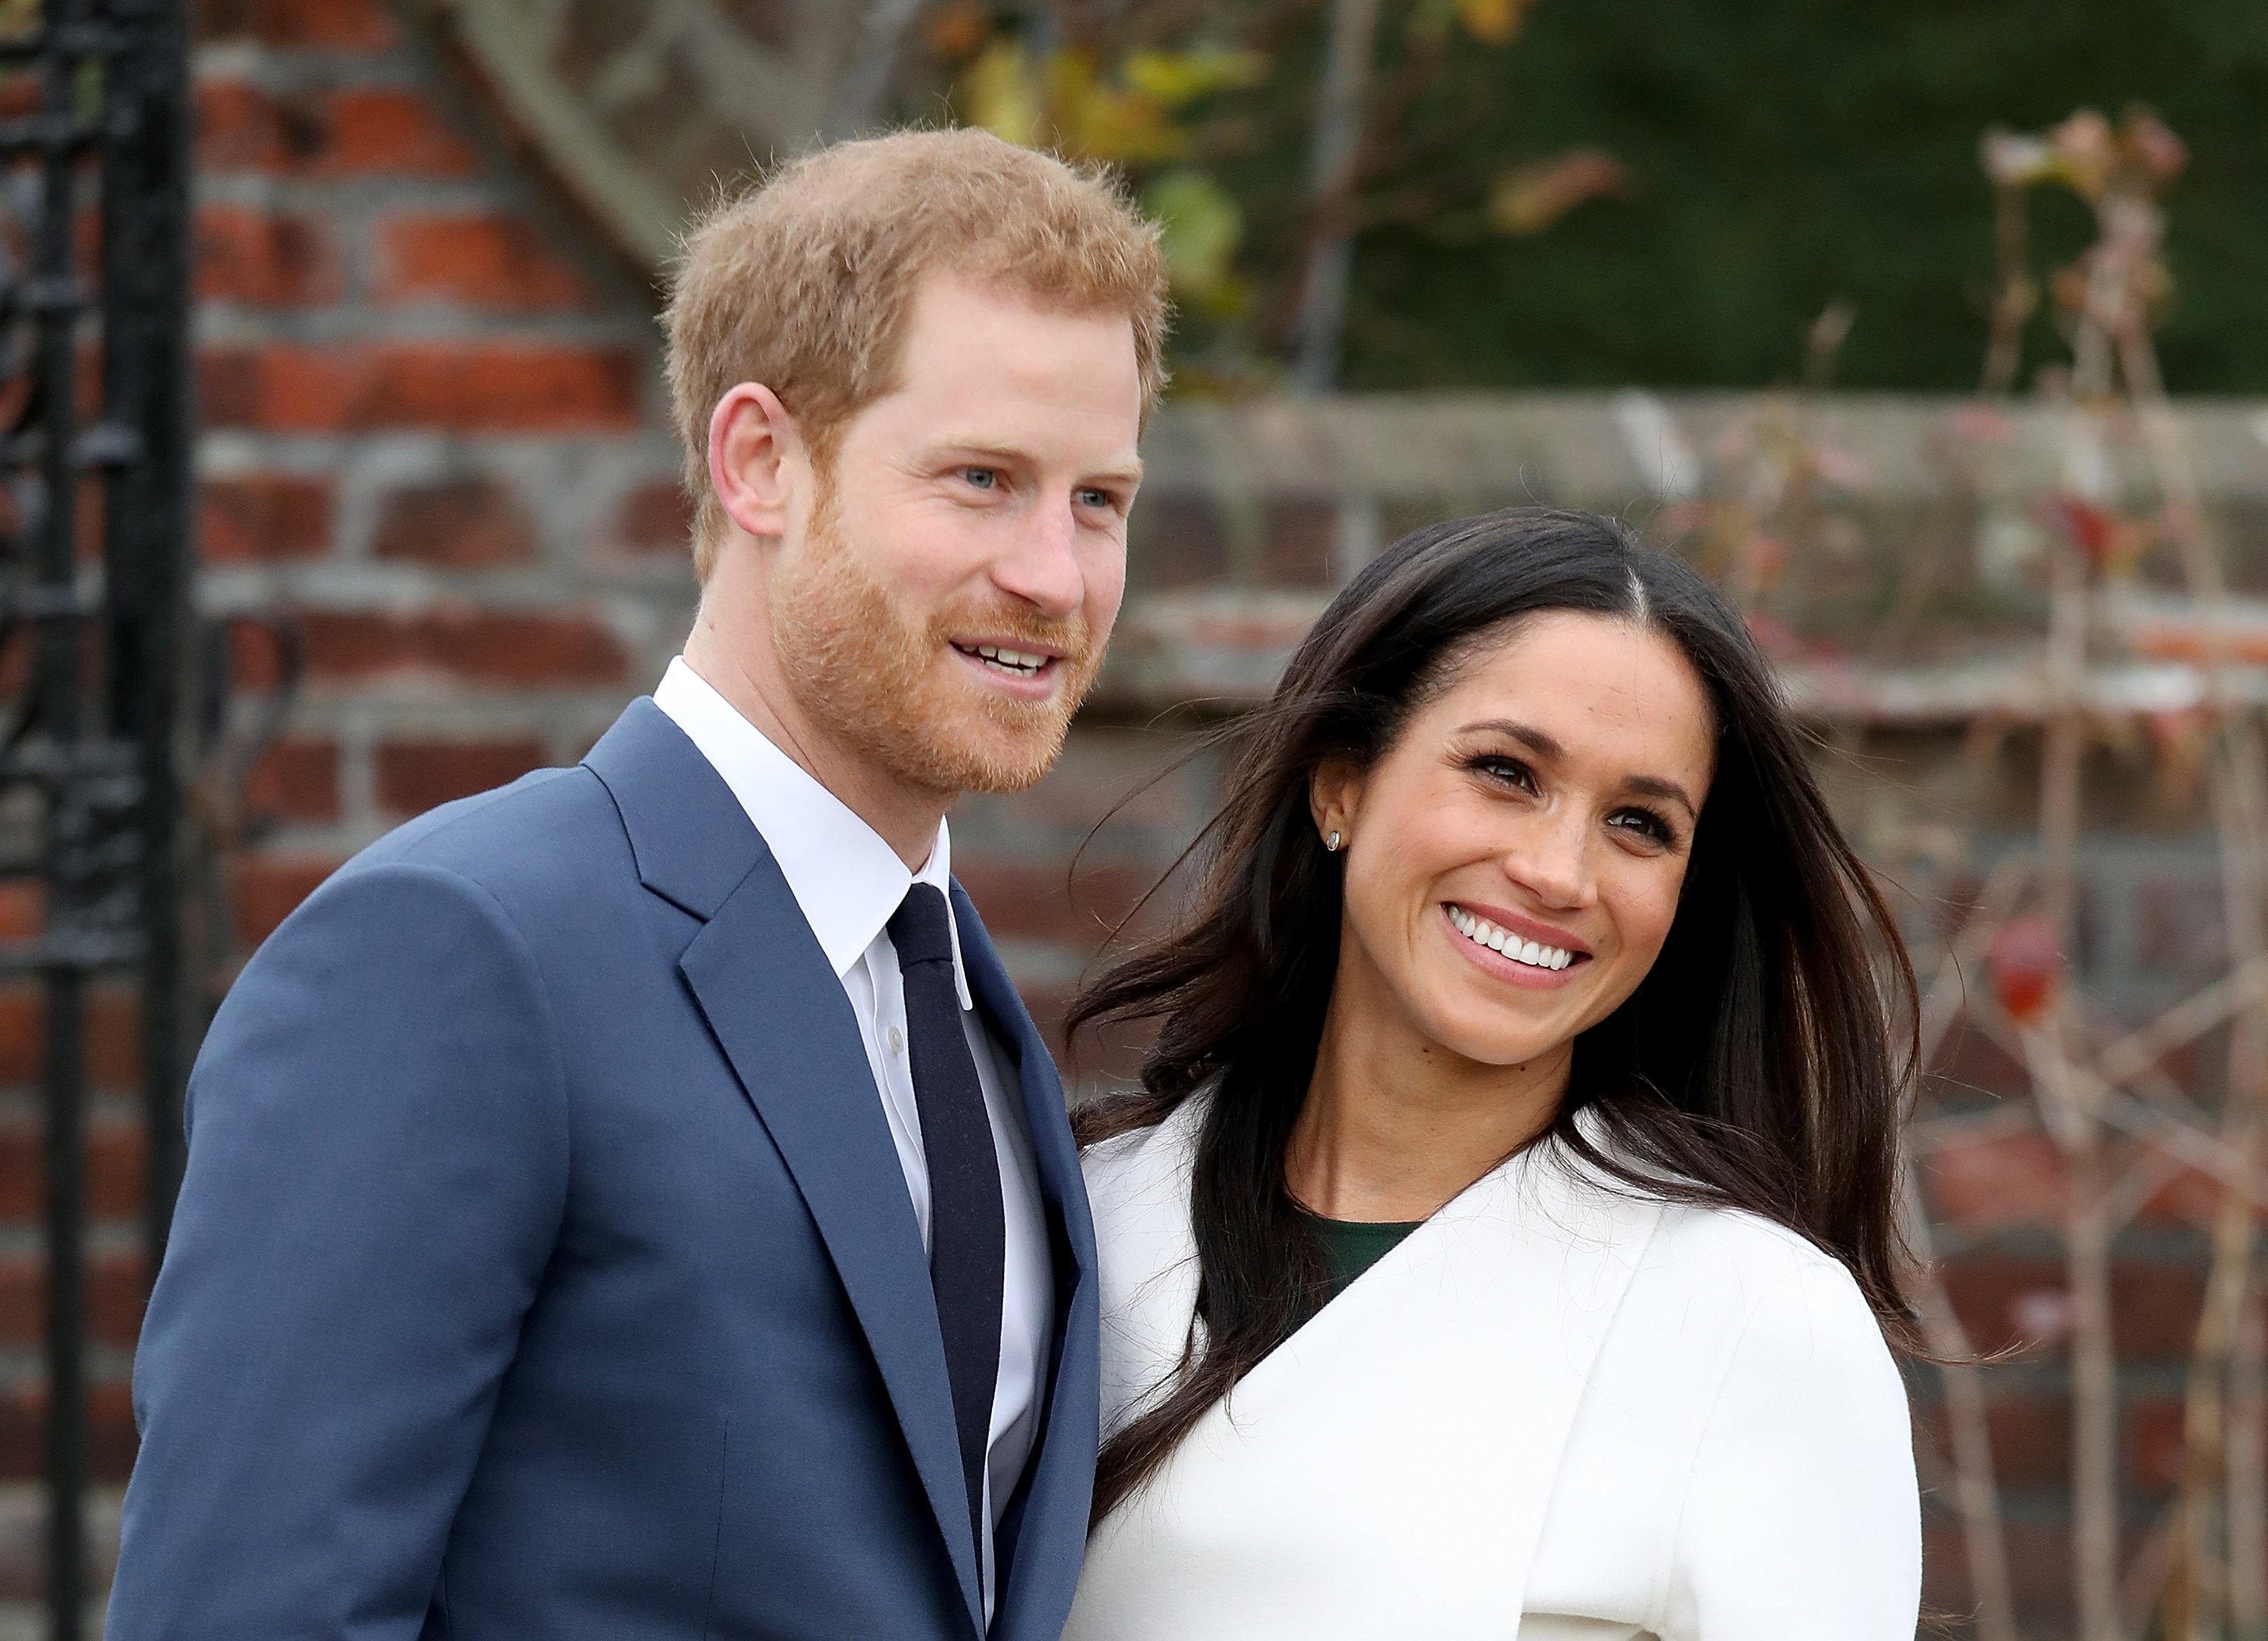 Prince Harry and actress Meghan Markle during an official photocall to announce their engagement at The Sunken Gardens at Kensington Palace on November 27, 2017 in London, England | Source: Getty Images